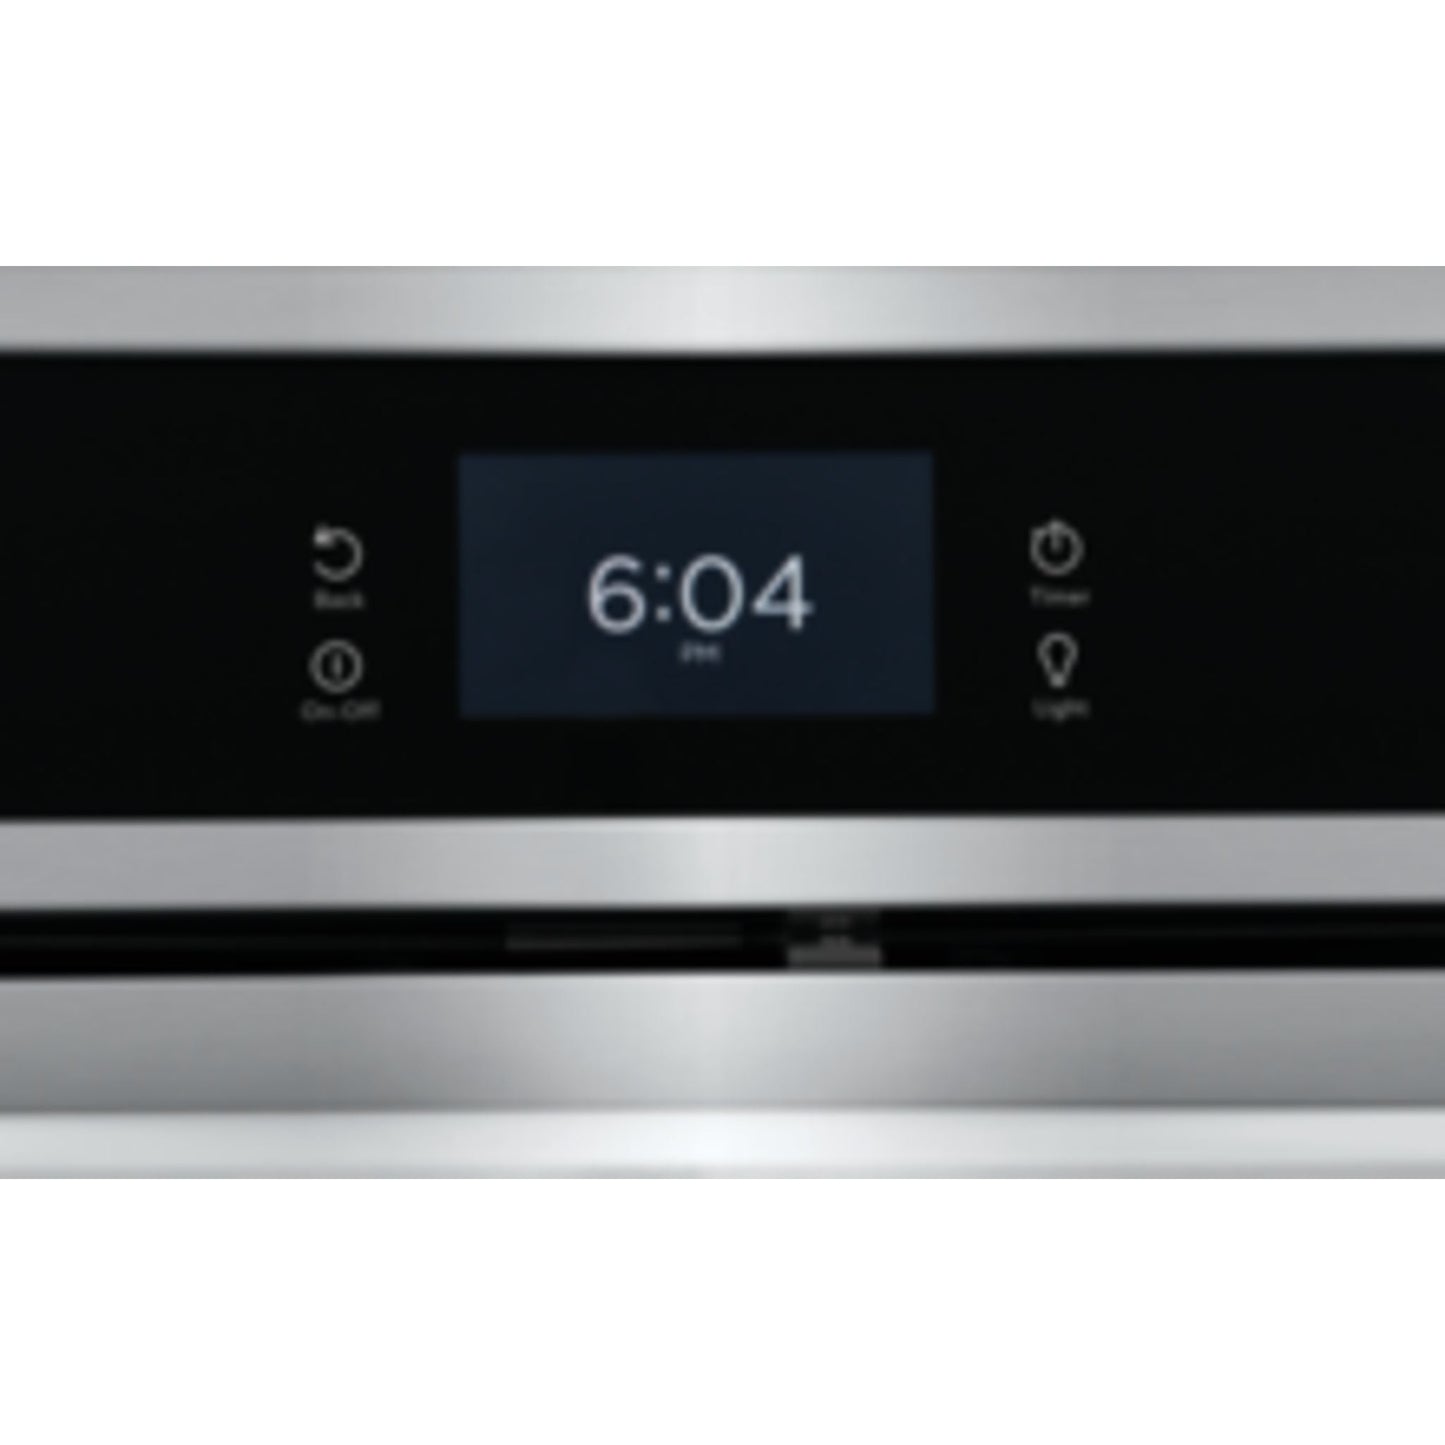 Frigidaire Gallery 30" True Convection Wall Oven (GCWS3067AF) - Stainless, SmudgeProof